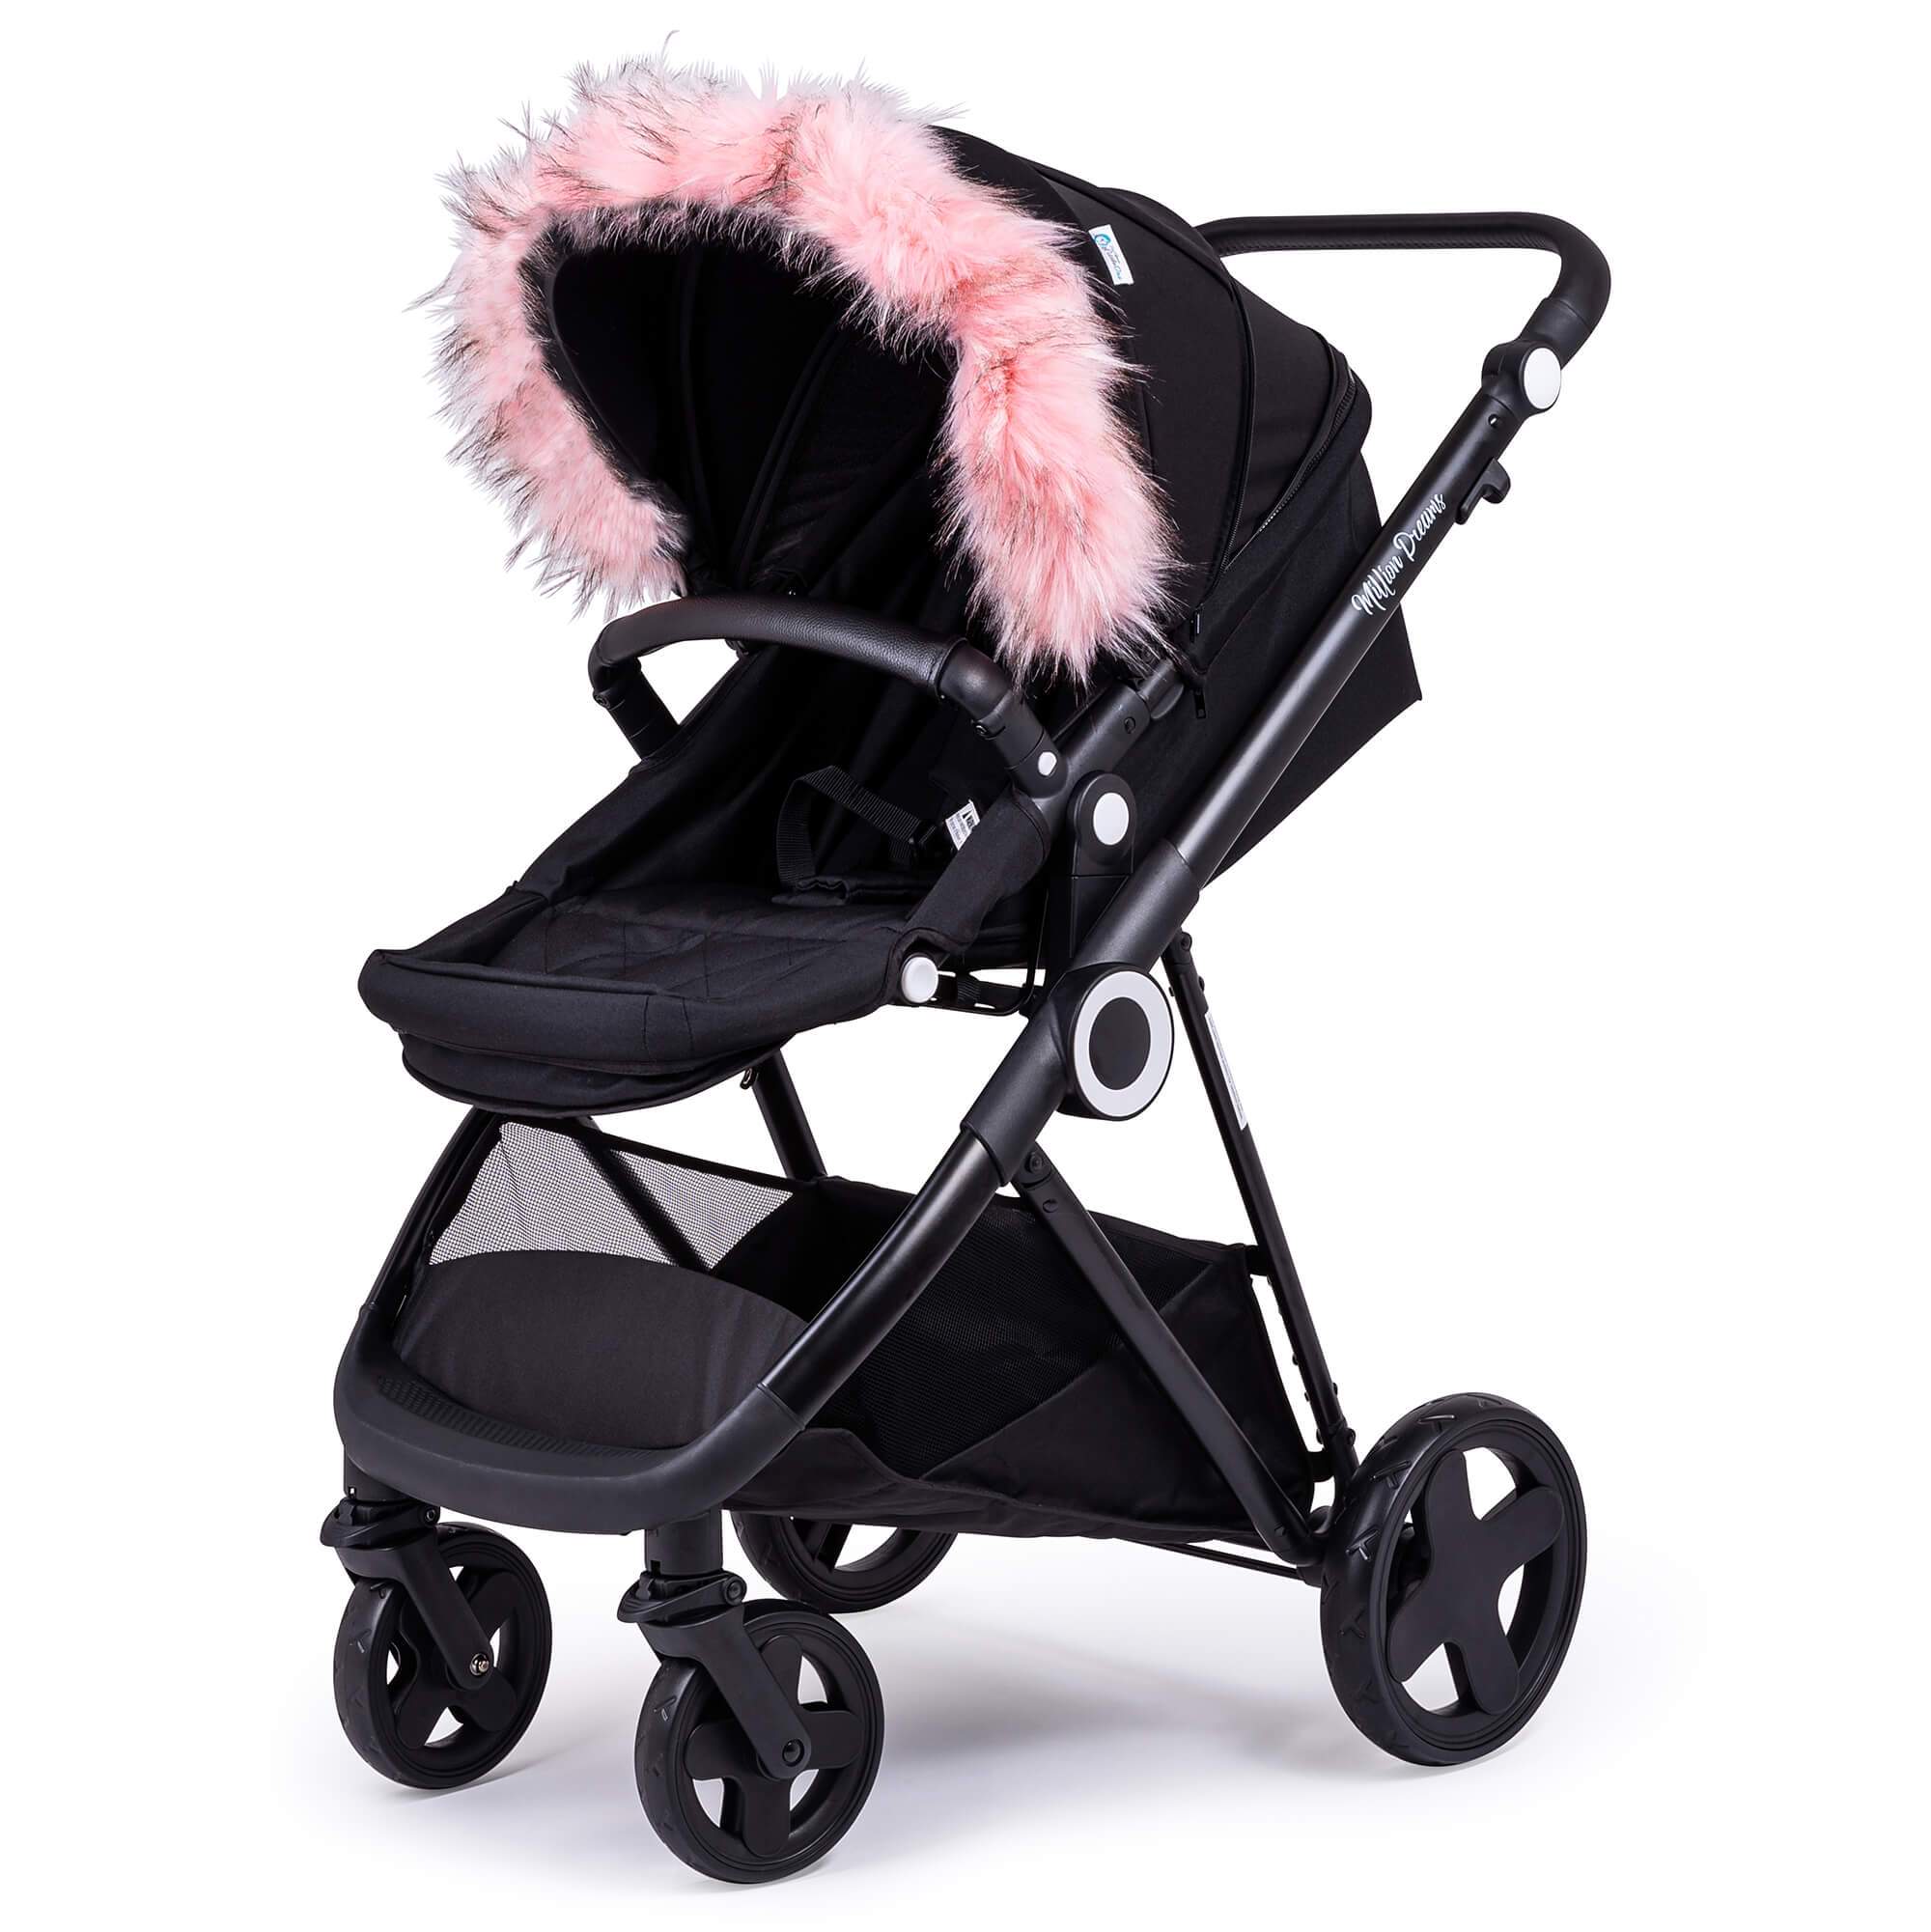 Pram Fur Hood Trim Attachment for Pushchair Compatible with BabyStyle - Light Pink / Fits All Models | For Your Little One